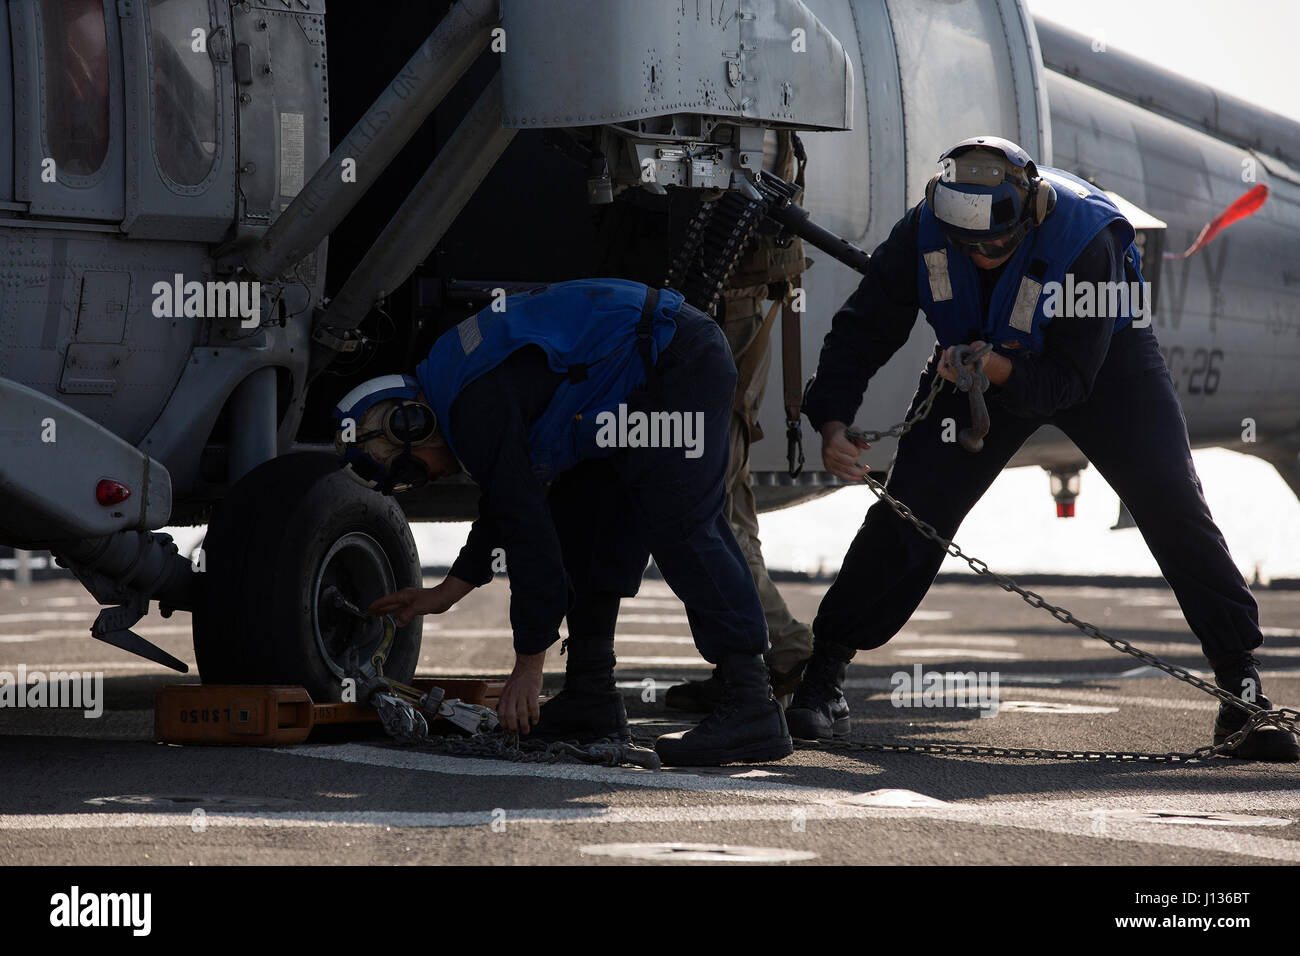 GULF OF ADEN (April 4, 2017) — U.S. Navy Seaman Jay Lao, left, and Petty Officer 3rd Class Derek Valenti, chain down an MH-60S Sea Hawk assigned to the Desert Hawks of Helicopter Sea Combat Squadron (HSC) 26, after it lands on the flight deck of the amphibious dock landing ship USS Carter Hall (LSD 50) during flight operations April 4. Carter Hall, part of the Bataan Amphibious Ready Group, is deployed to the U.S. 5th Fleet area of operations in support of maritime security operations designed to reassure allies and partners and preserve the freedom of navigation and the free flow of commerce  Stock Photo